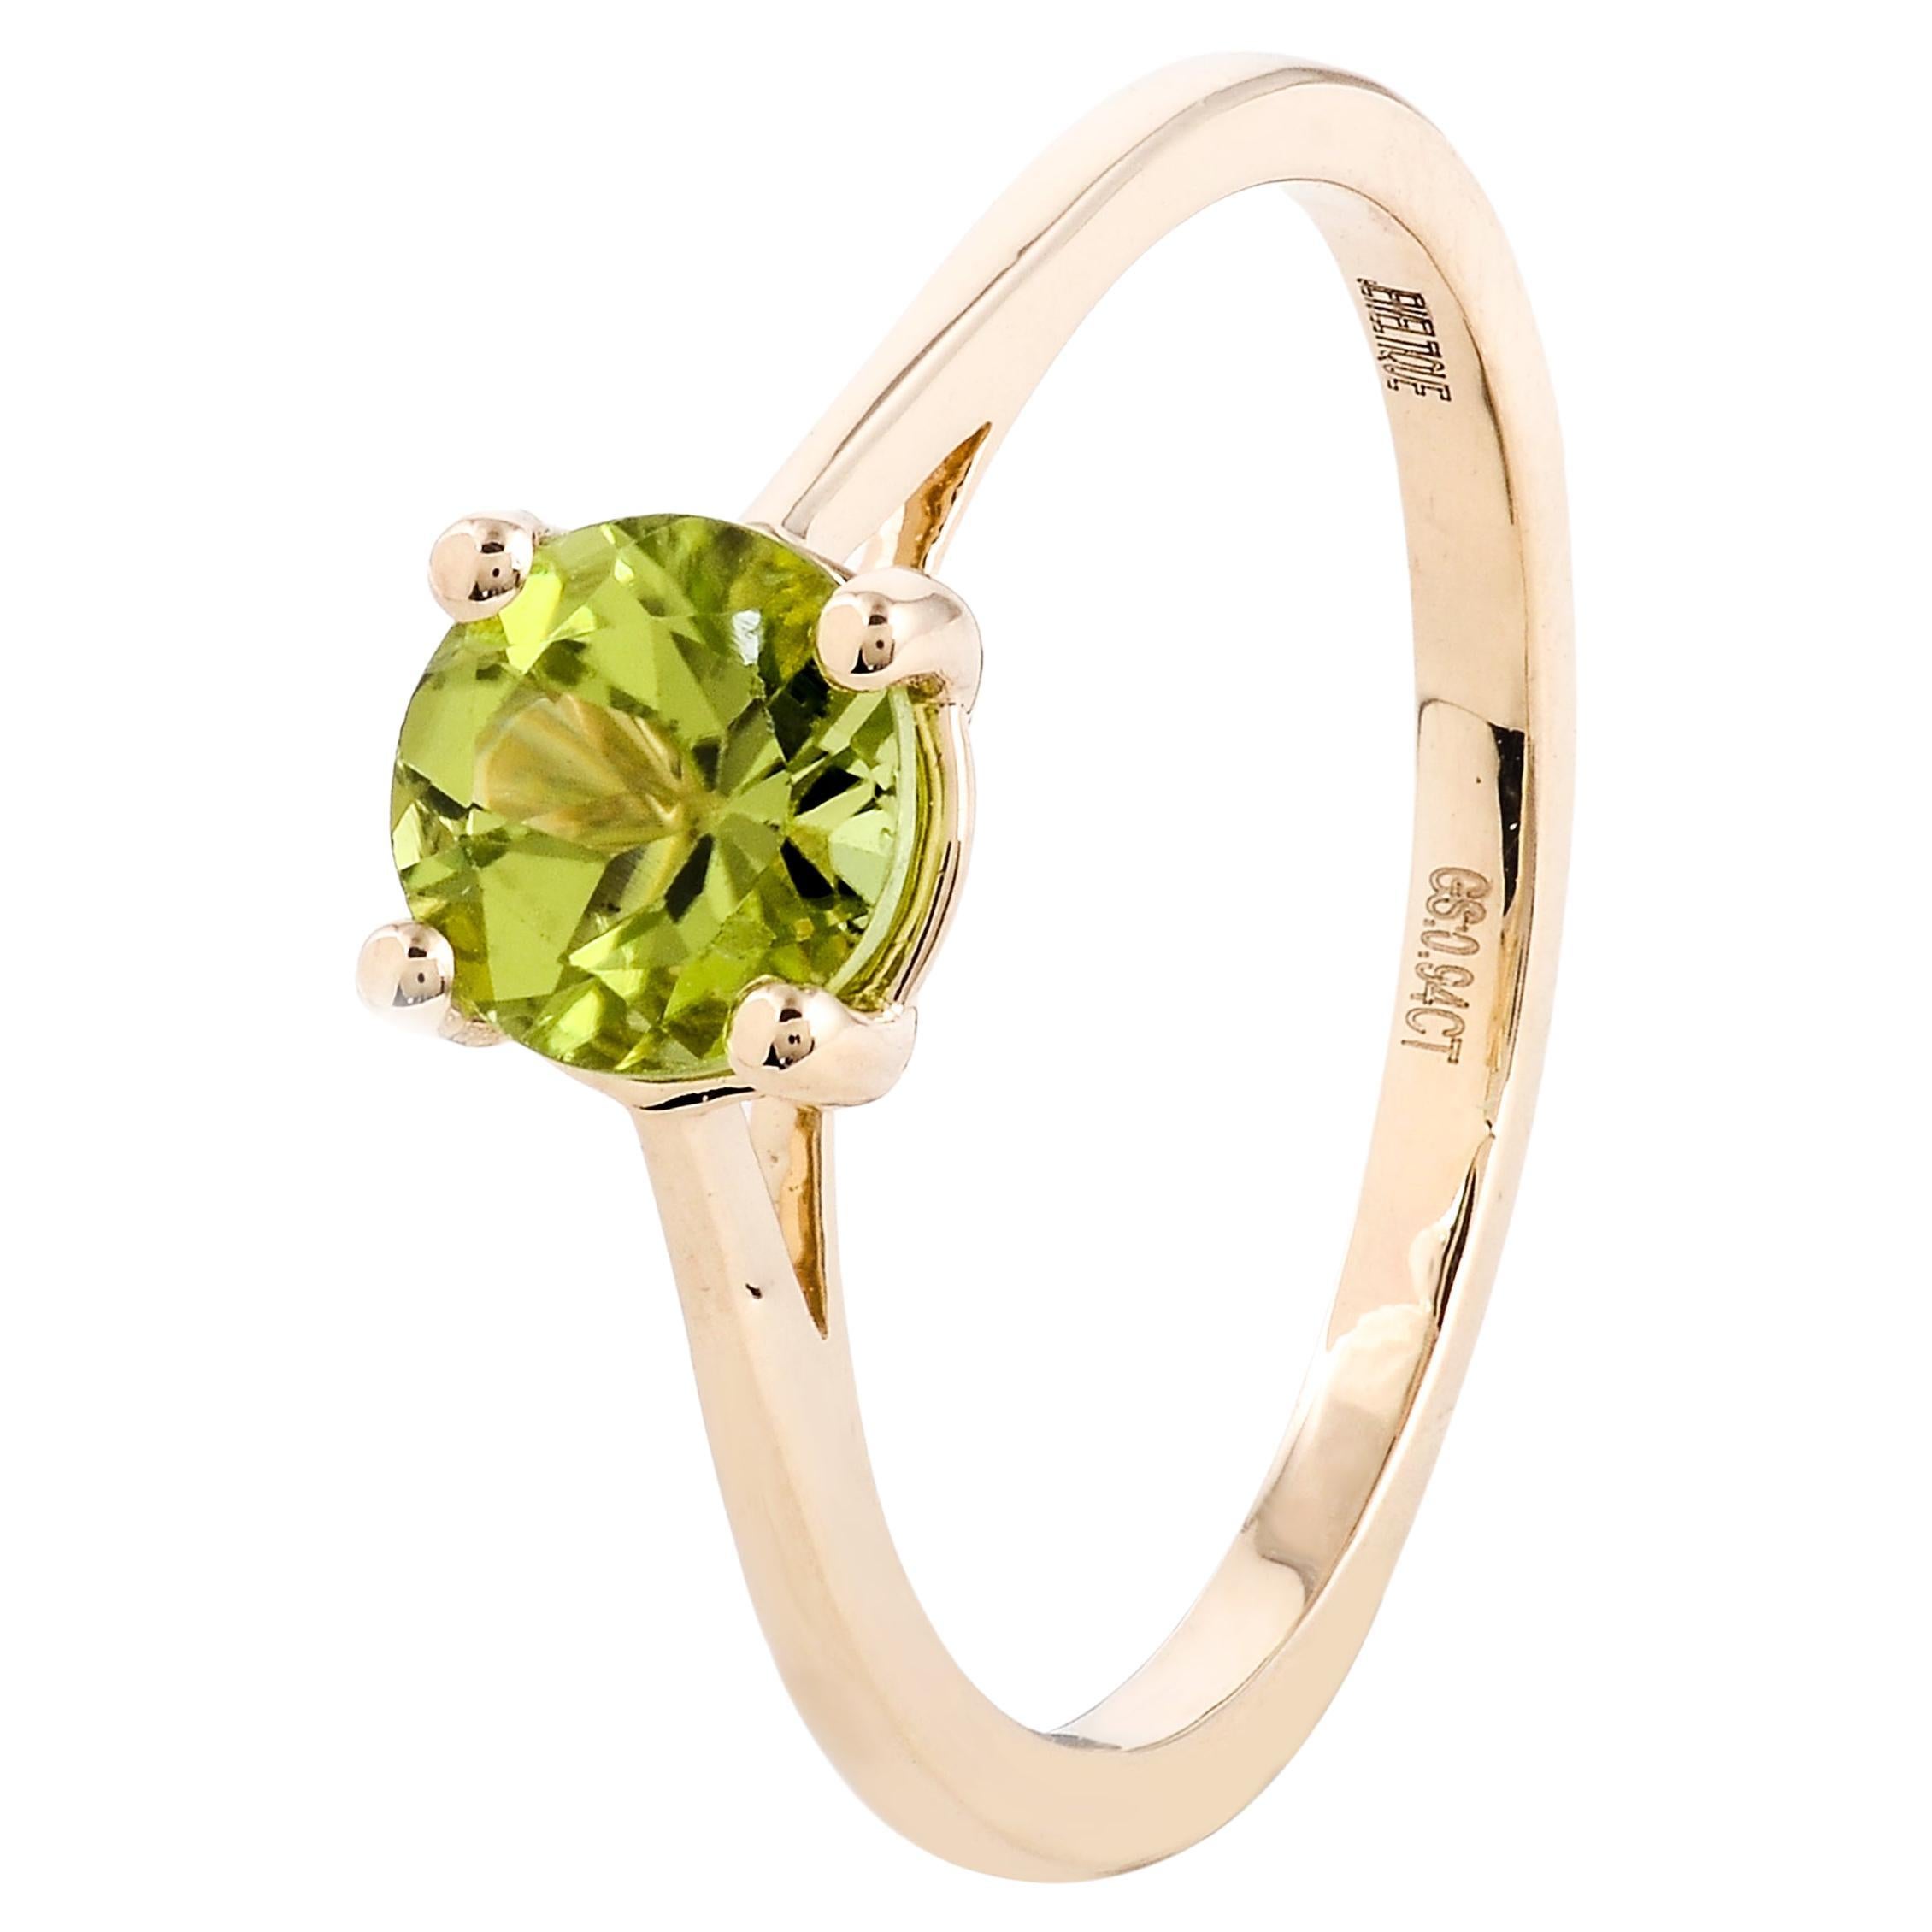 Elegant 14K Peridot Cocktail Ring, Size 7 - Stunning Statement Jewelry Piece For Sale